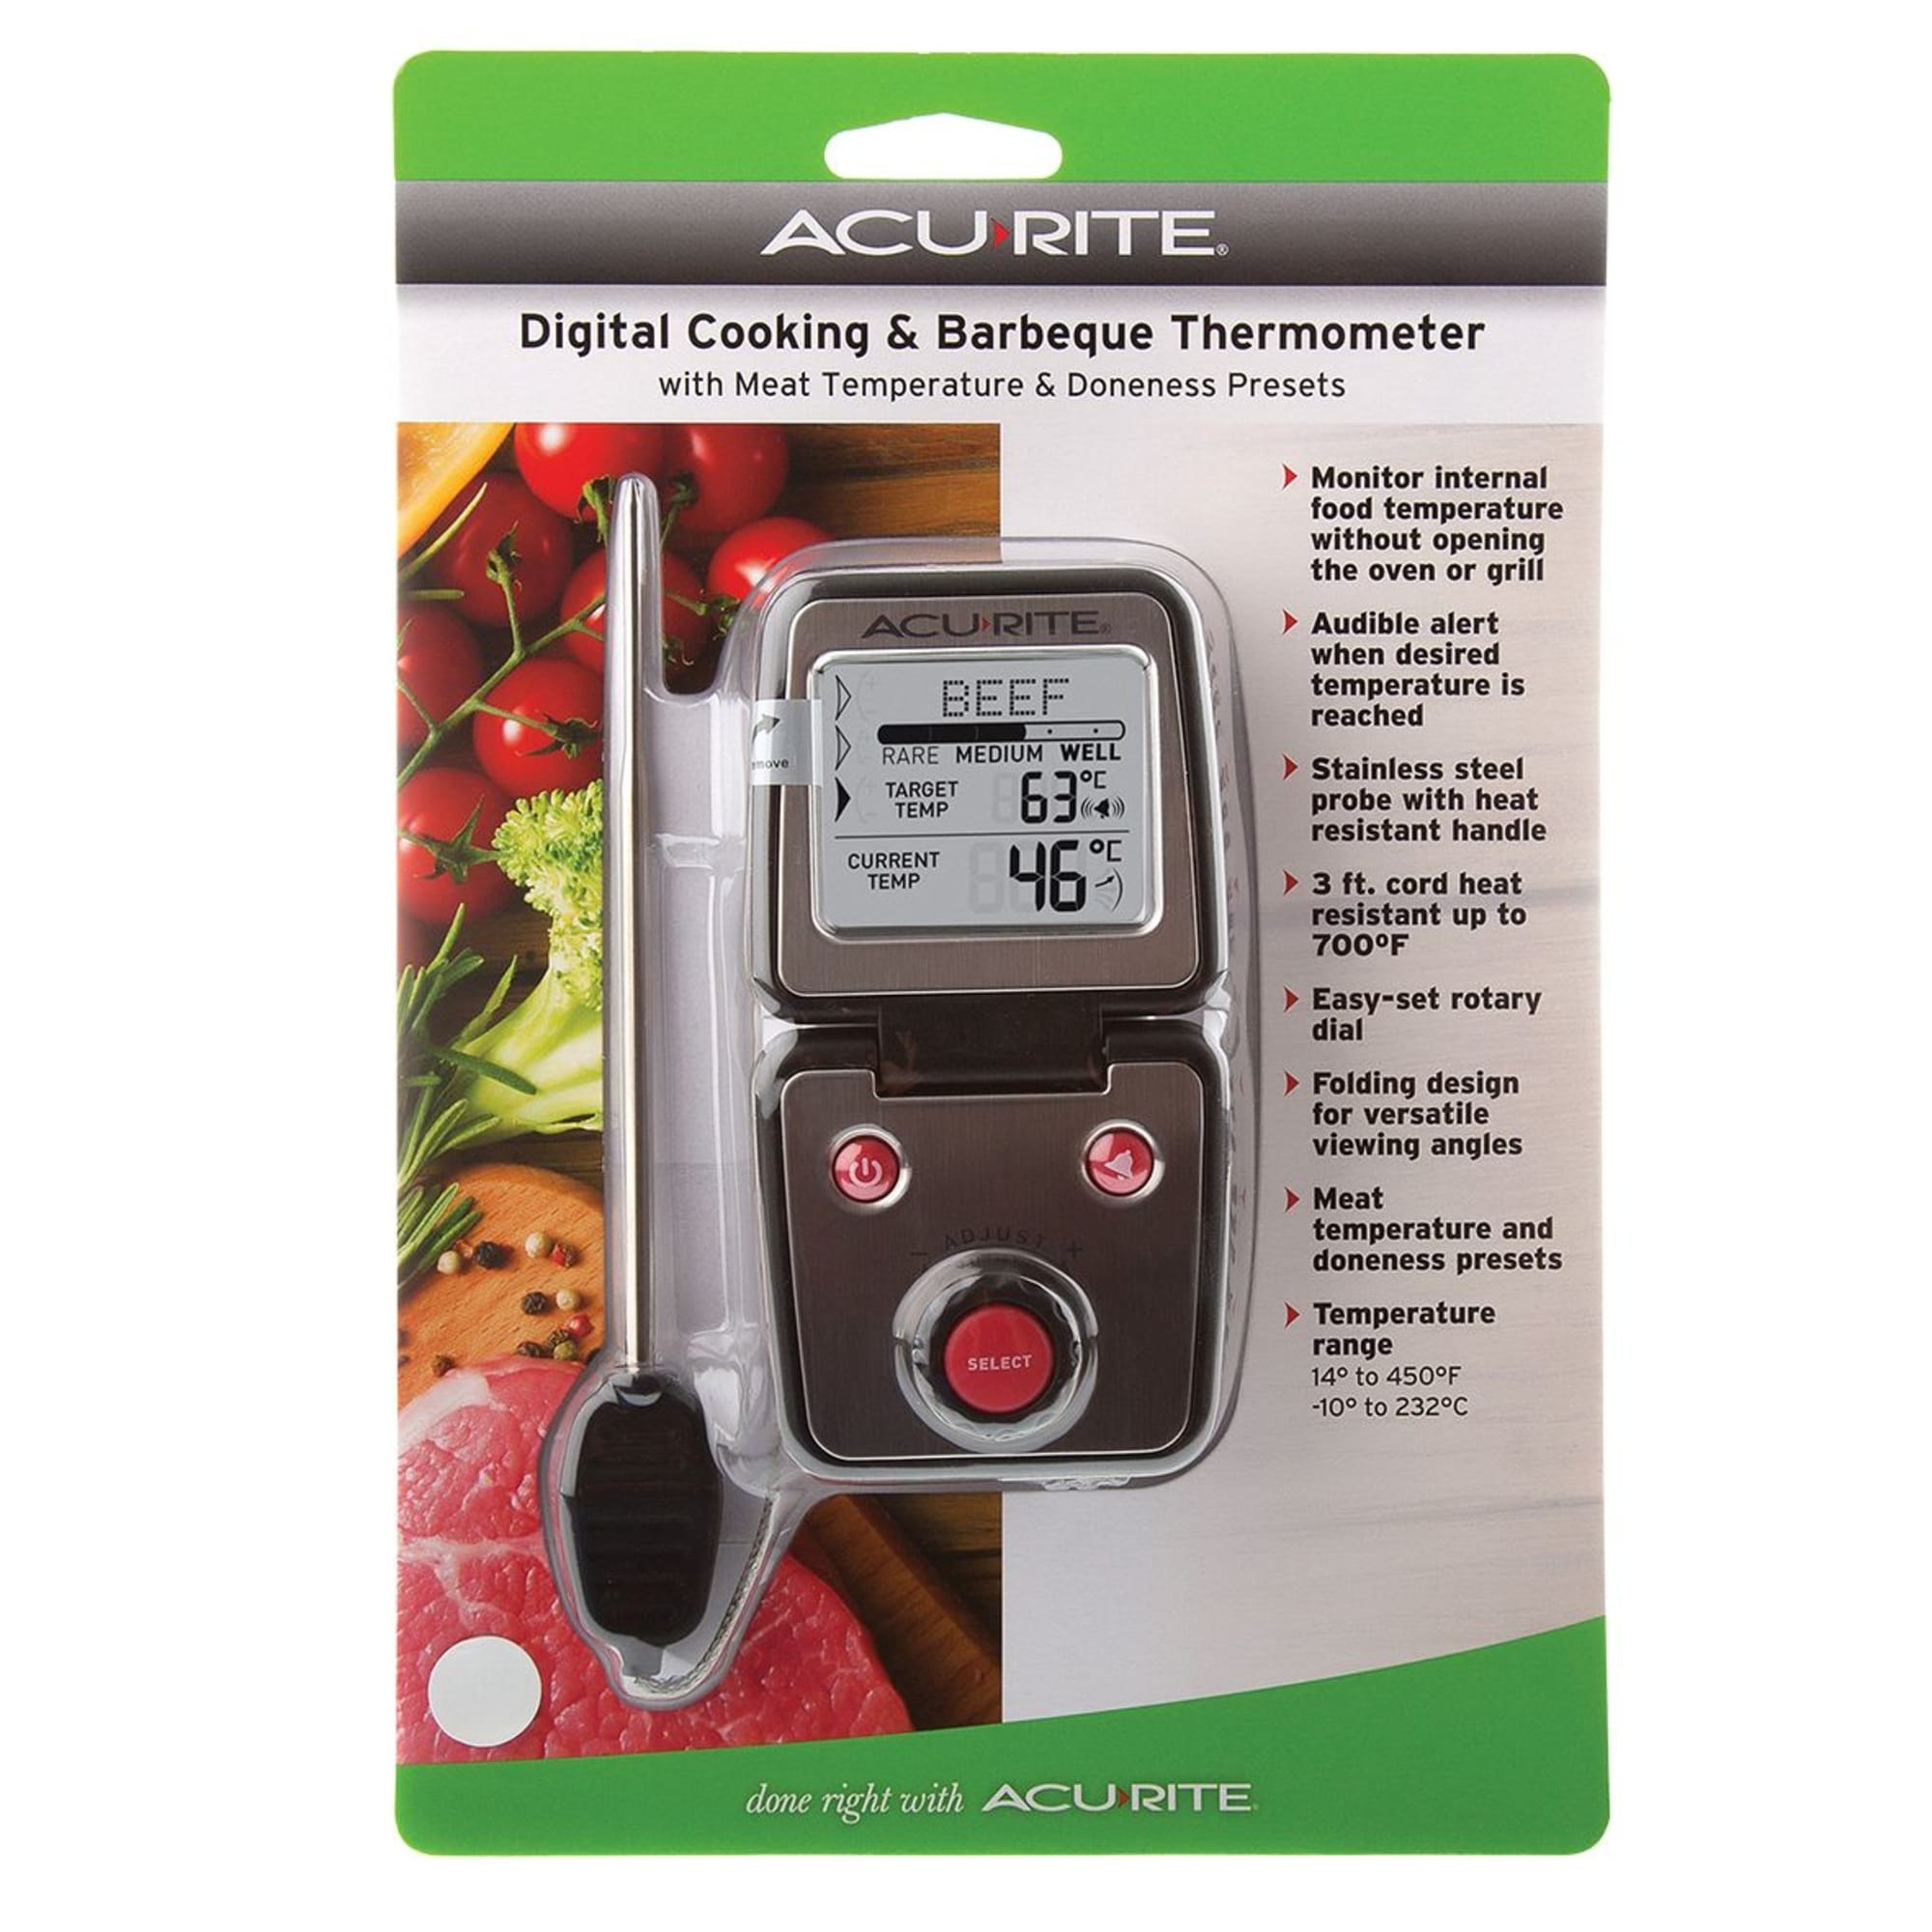 Acurite Programmable Meat Thermometer Image 2